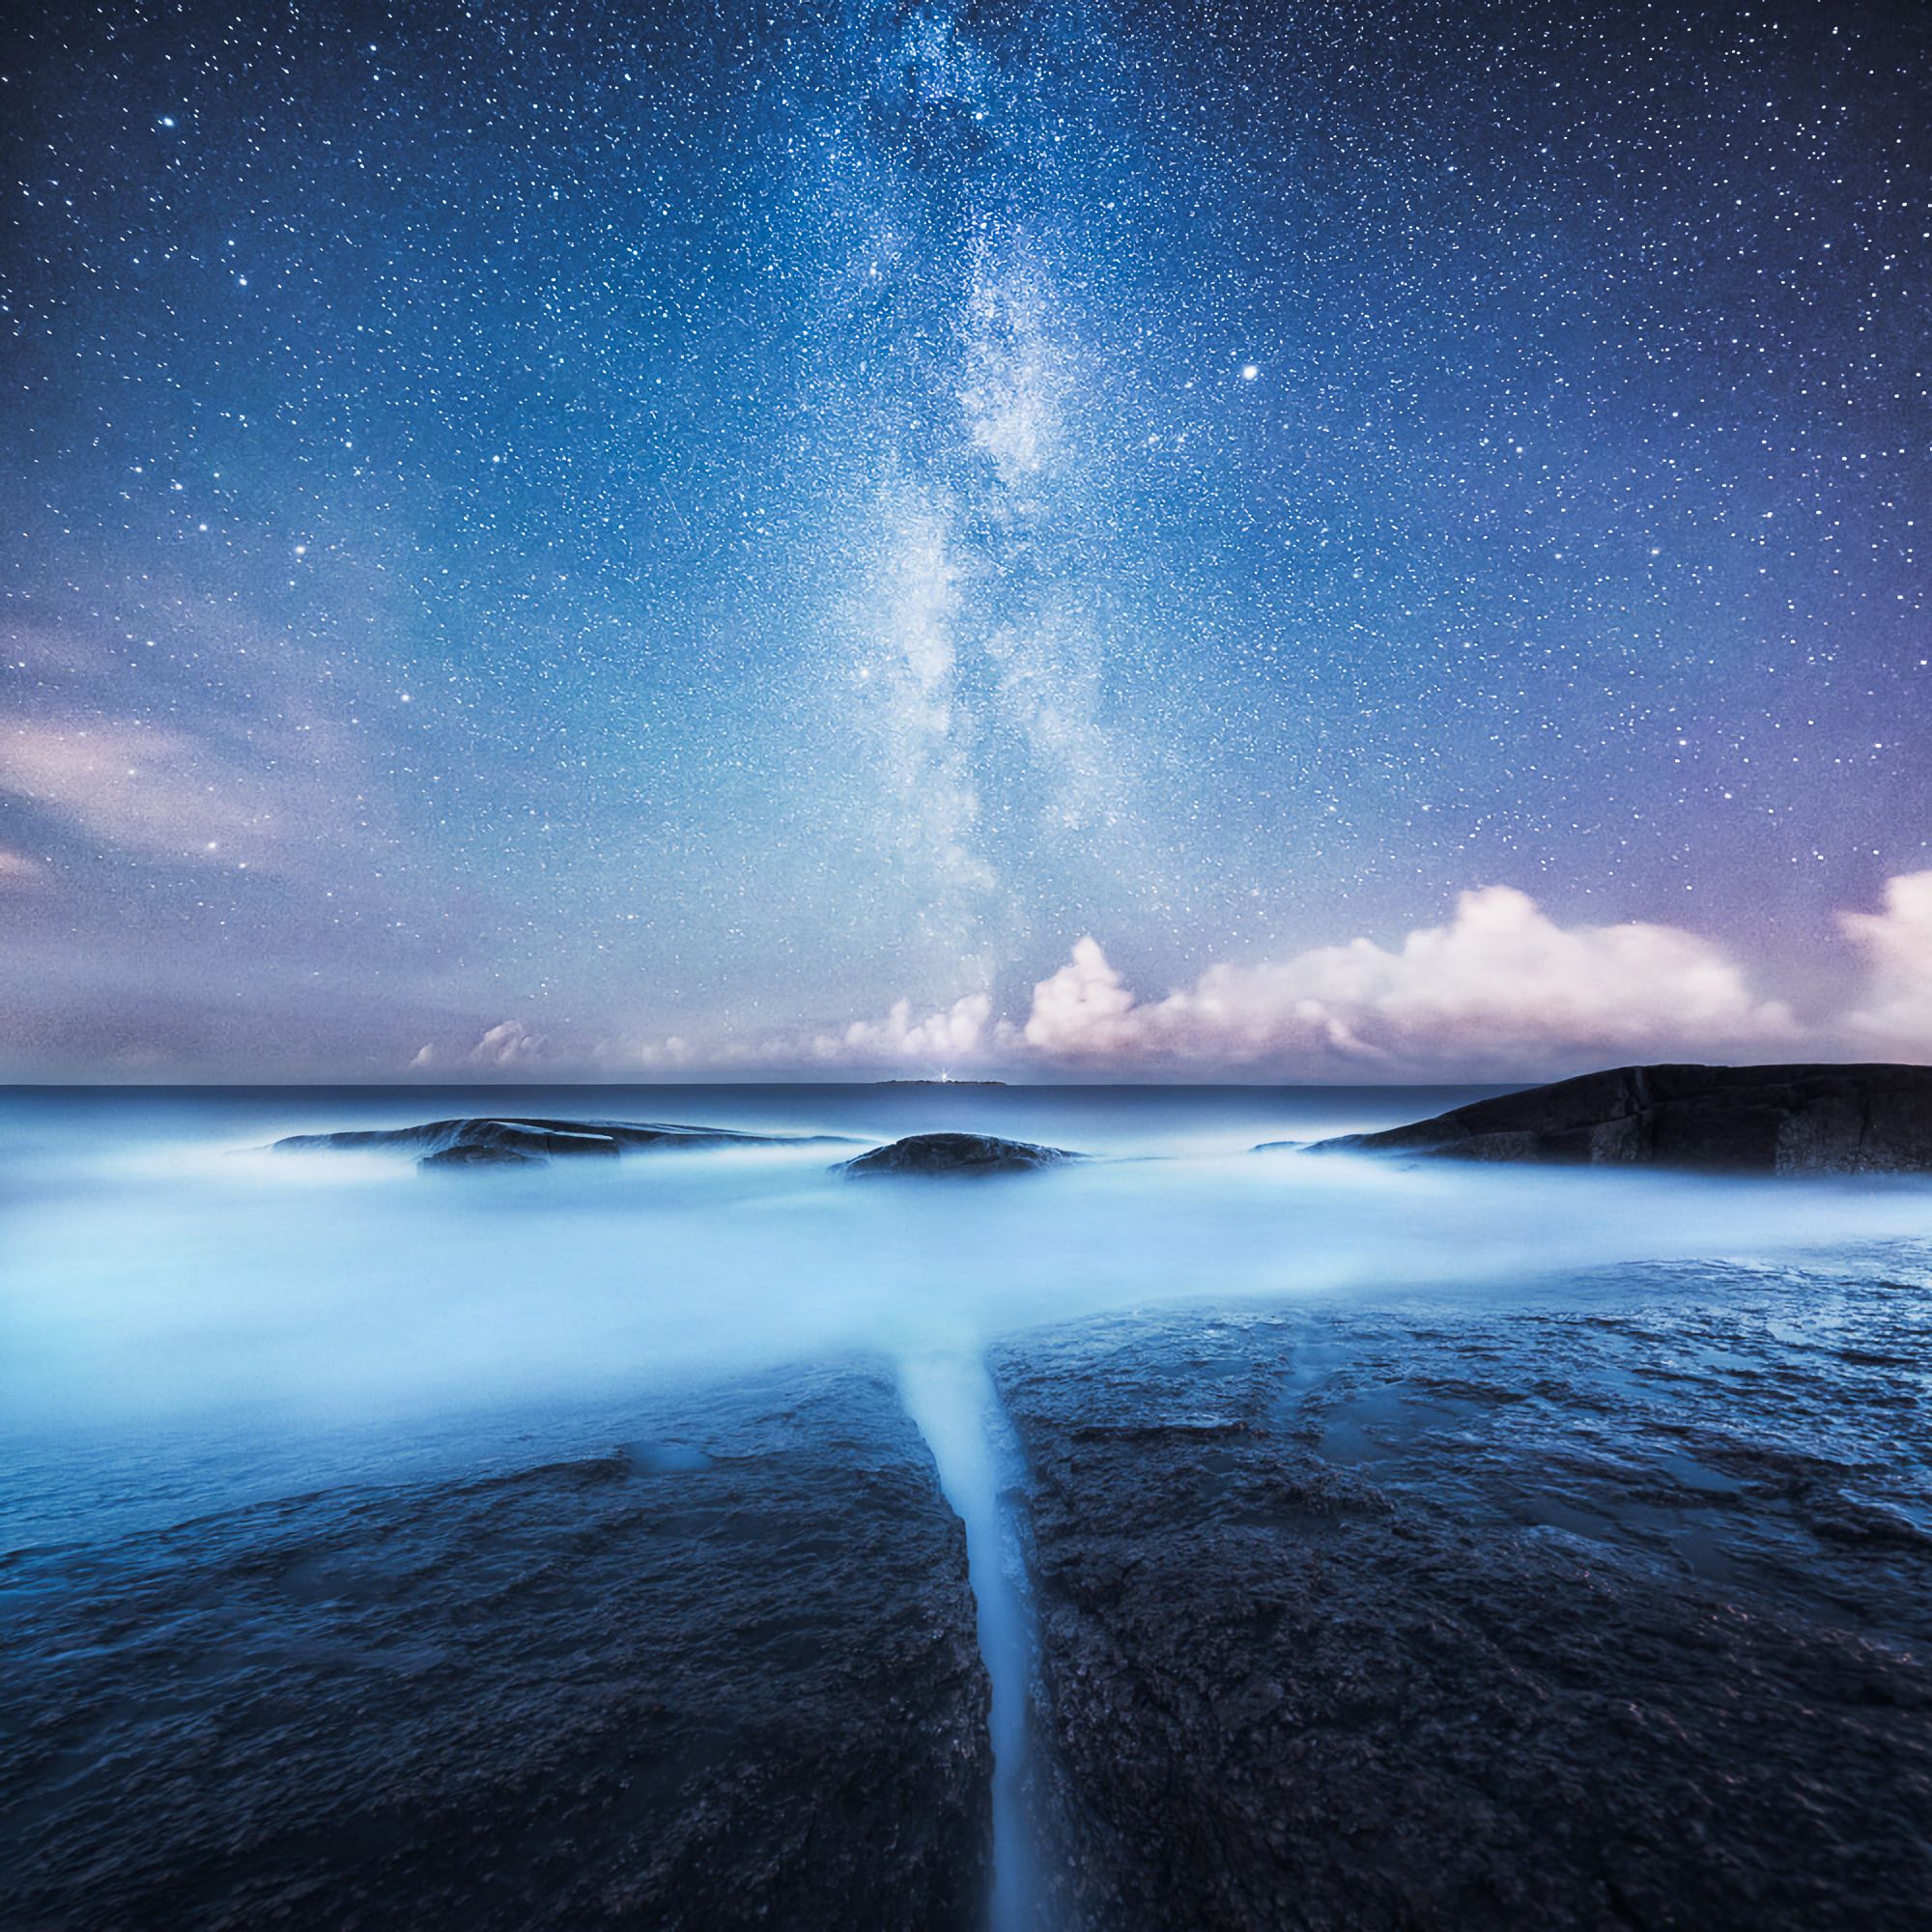 Widescreen image bank, shore, nature, starry sky